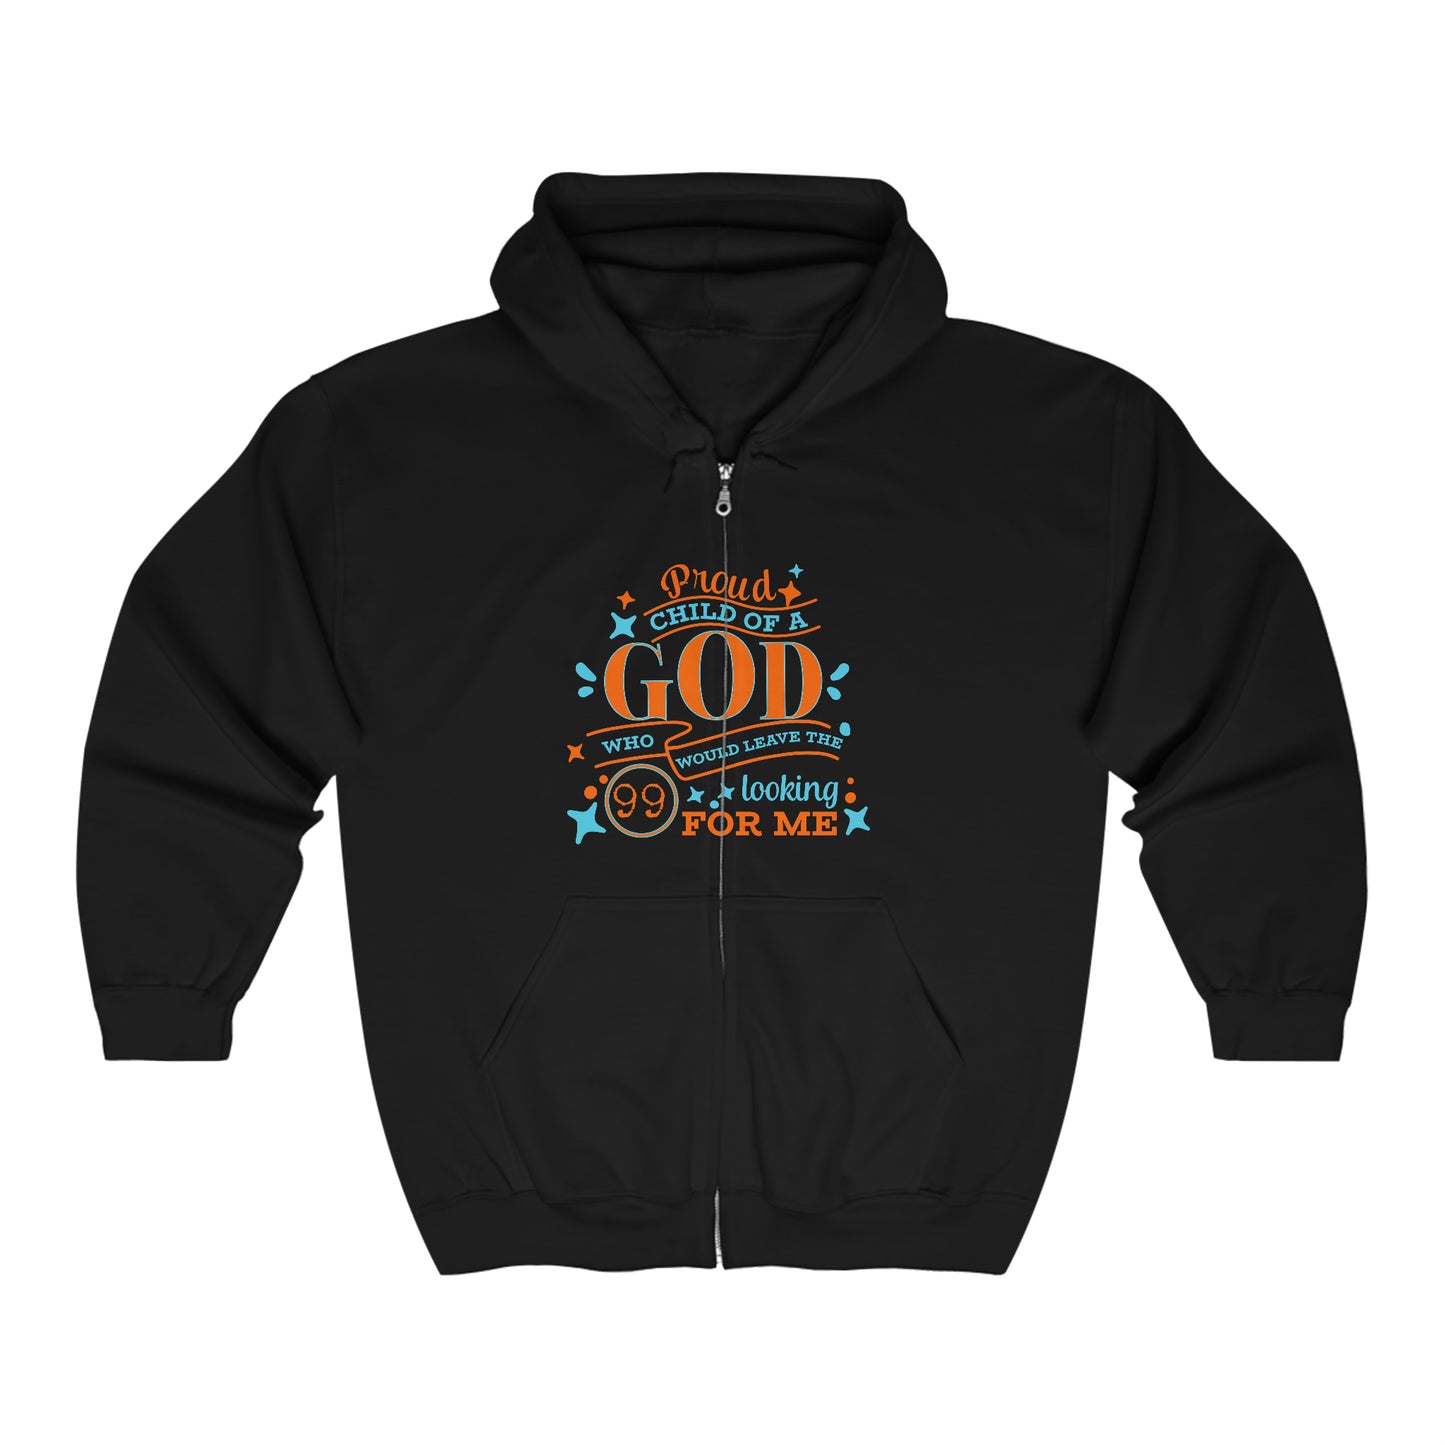 Proud Child Of A God Who Would Leave The 99 Looking For Me Unisex Heavy Blend Full Zip Hooded Sweatshirt